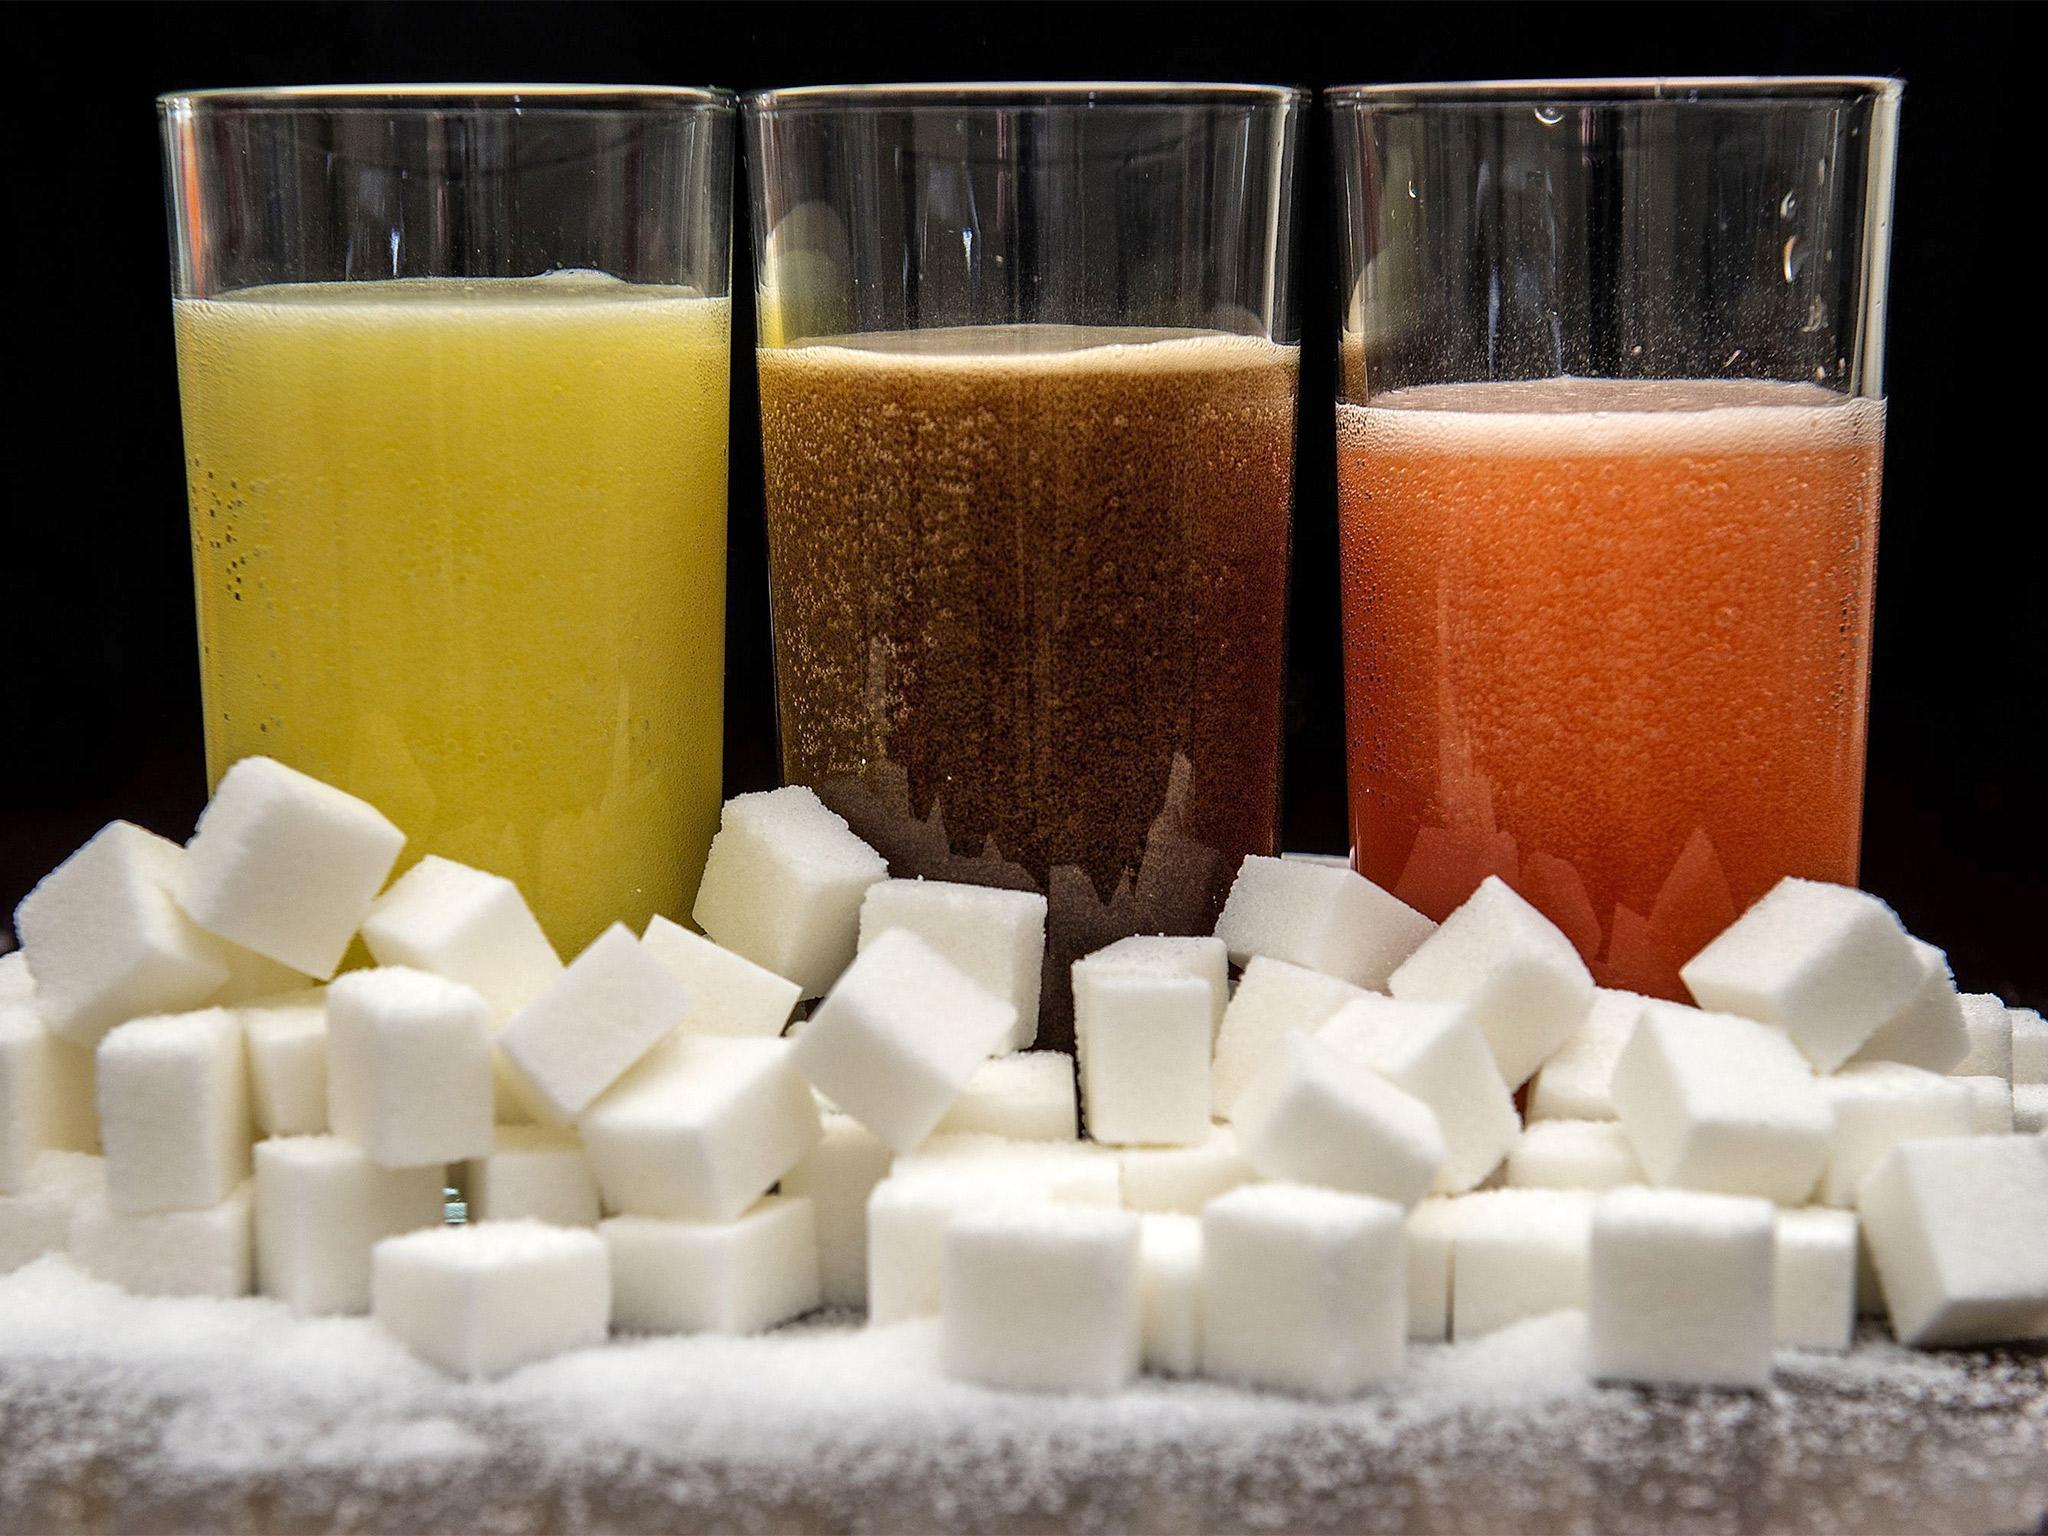 Will a sugar tax really prevent obesity from spreading in Britain?